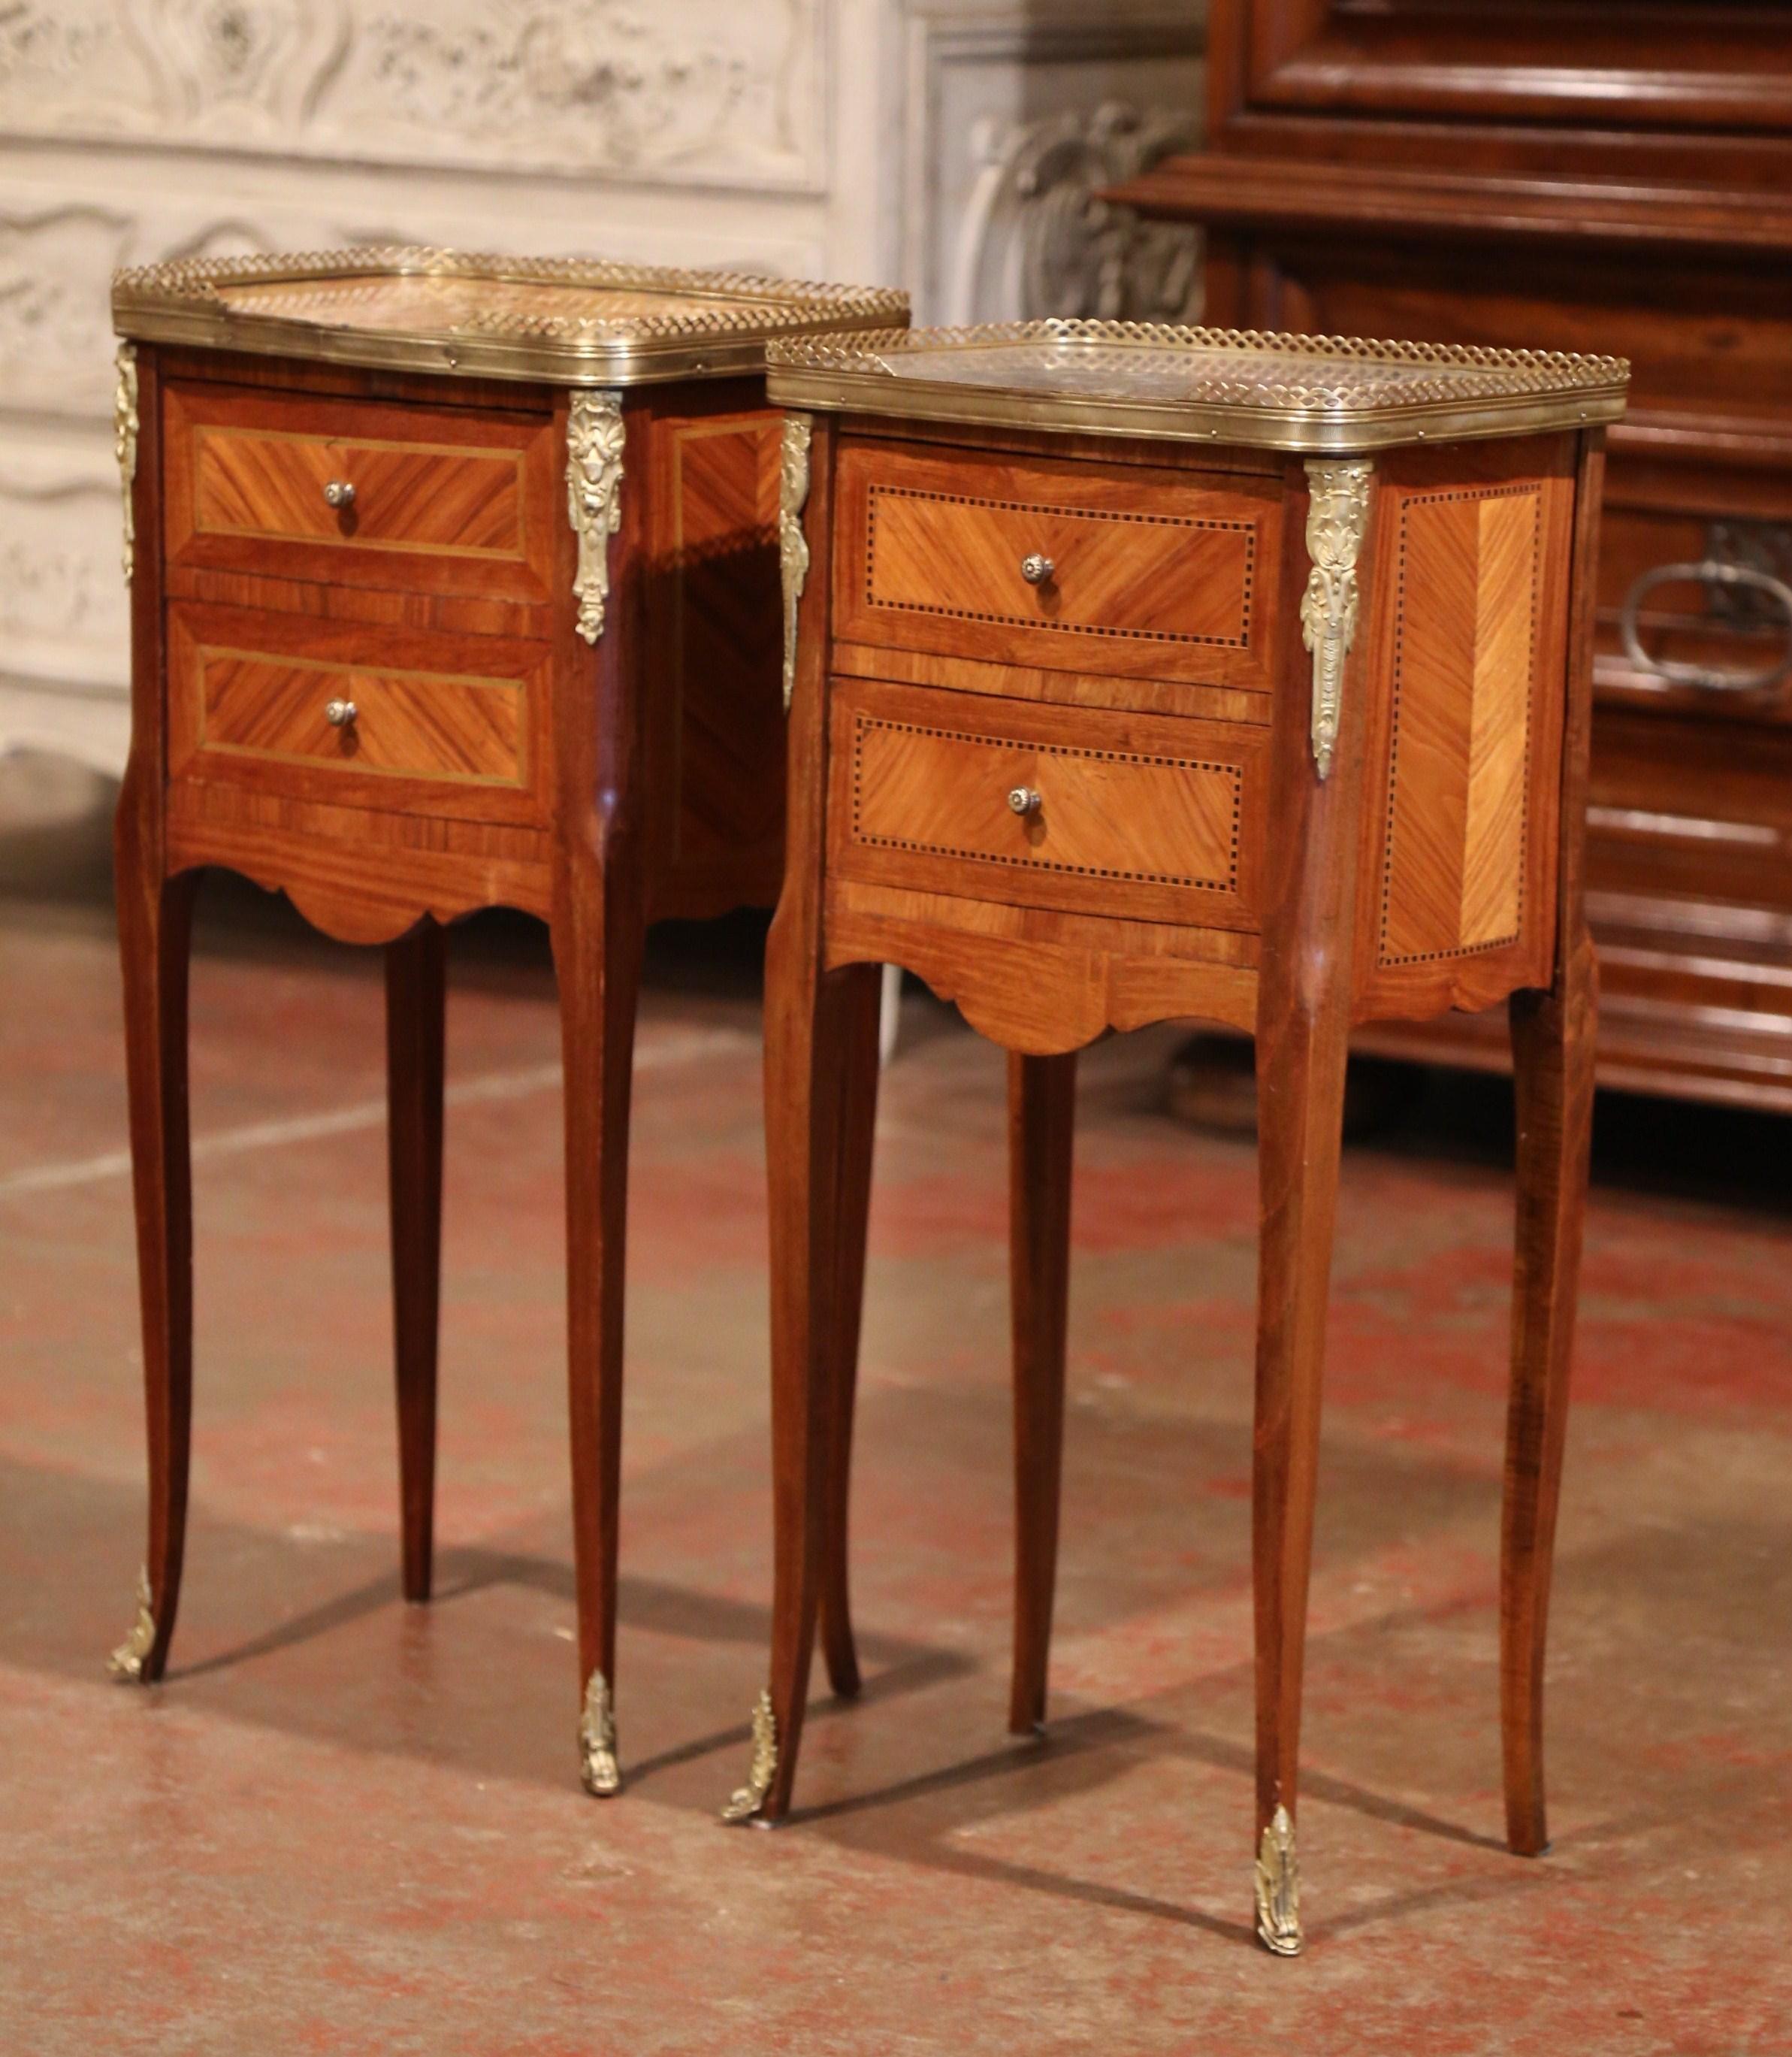 Crafted in France circa 1890, these elegant antique chests stand on cabriole legs decorated with bronze caps feet over a scalloped apron. The petite Louis XV style commodes feature two drawers across the front decorated with marquetry inlay work and